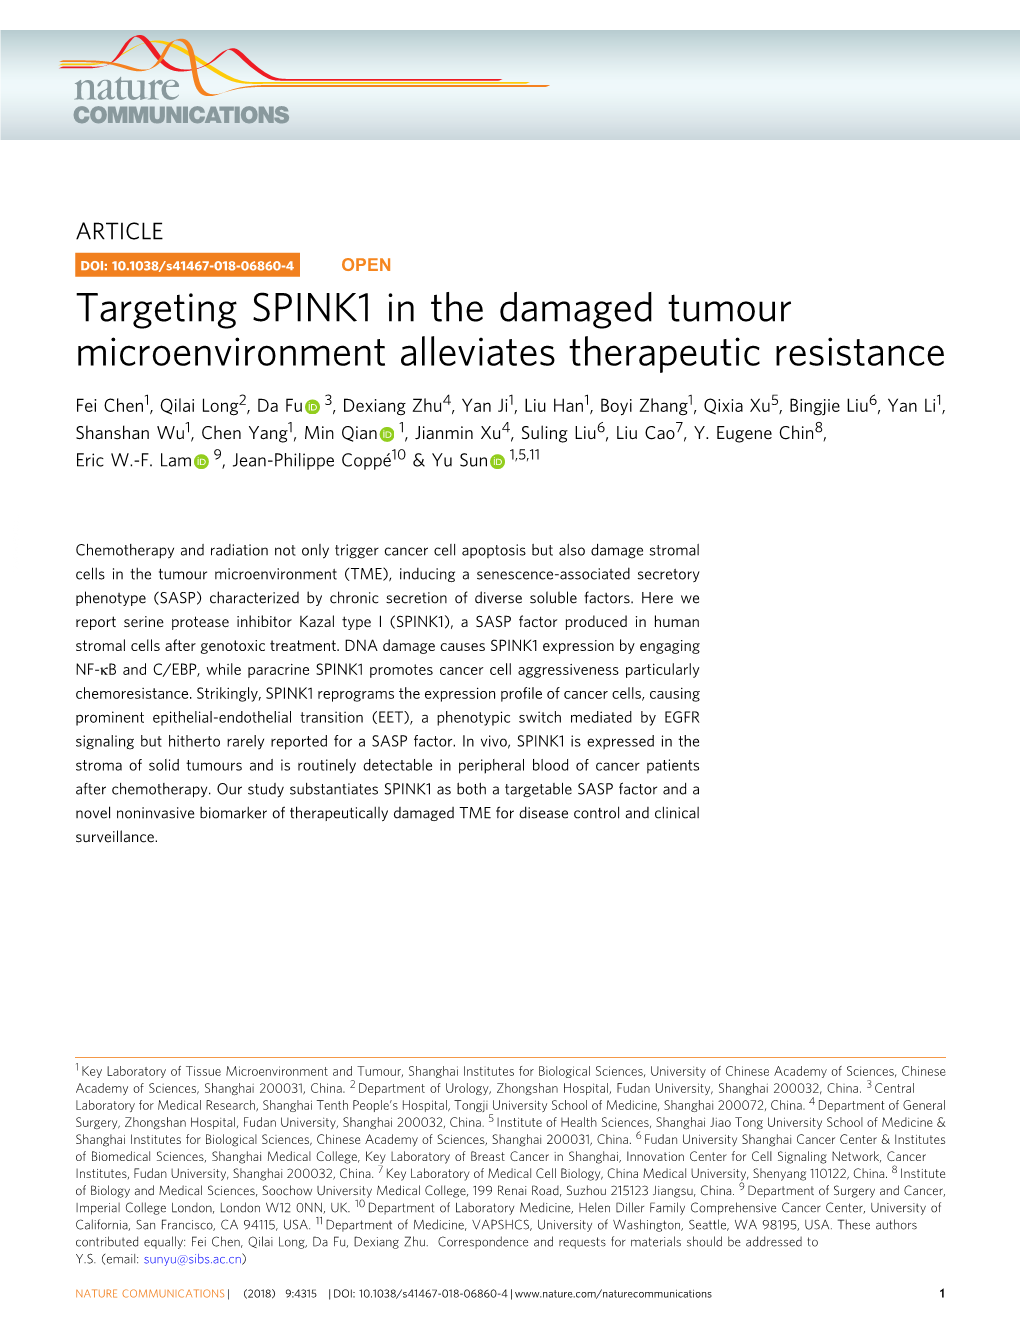 Targeting SPINK1 in the Damaged Tumour Microenvironment Alleviates Therapeutic Resistance